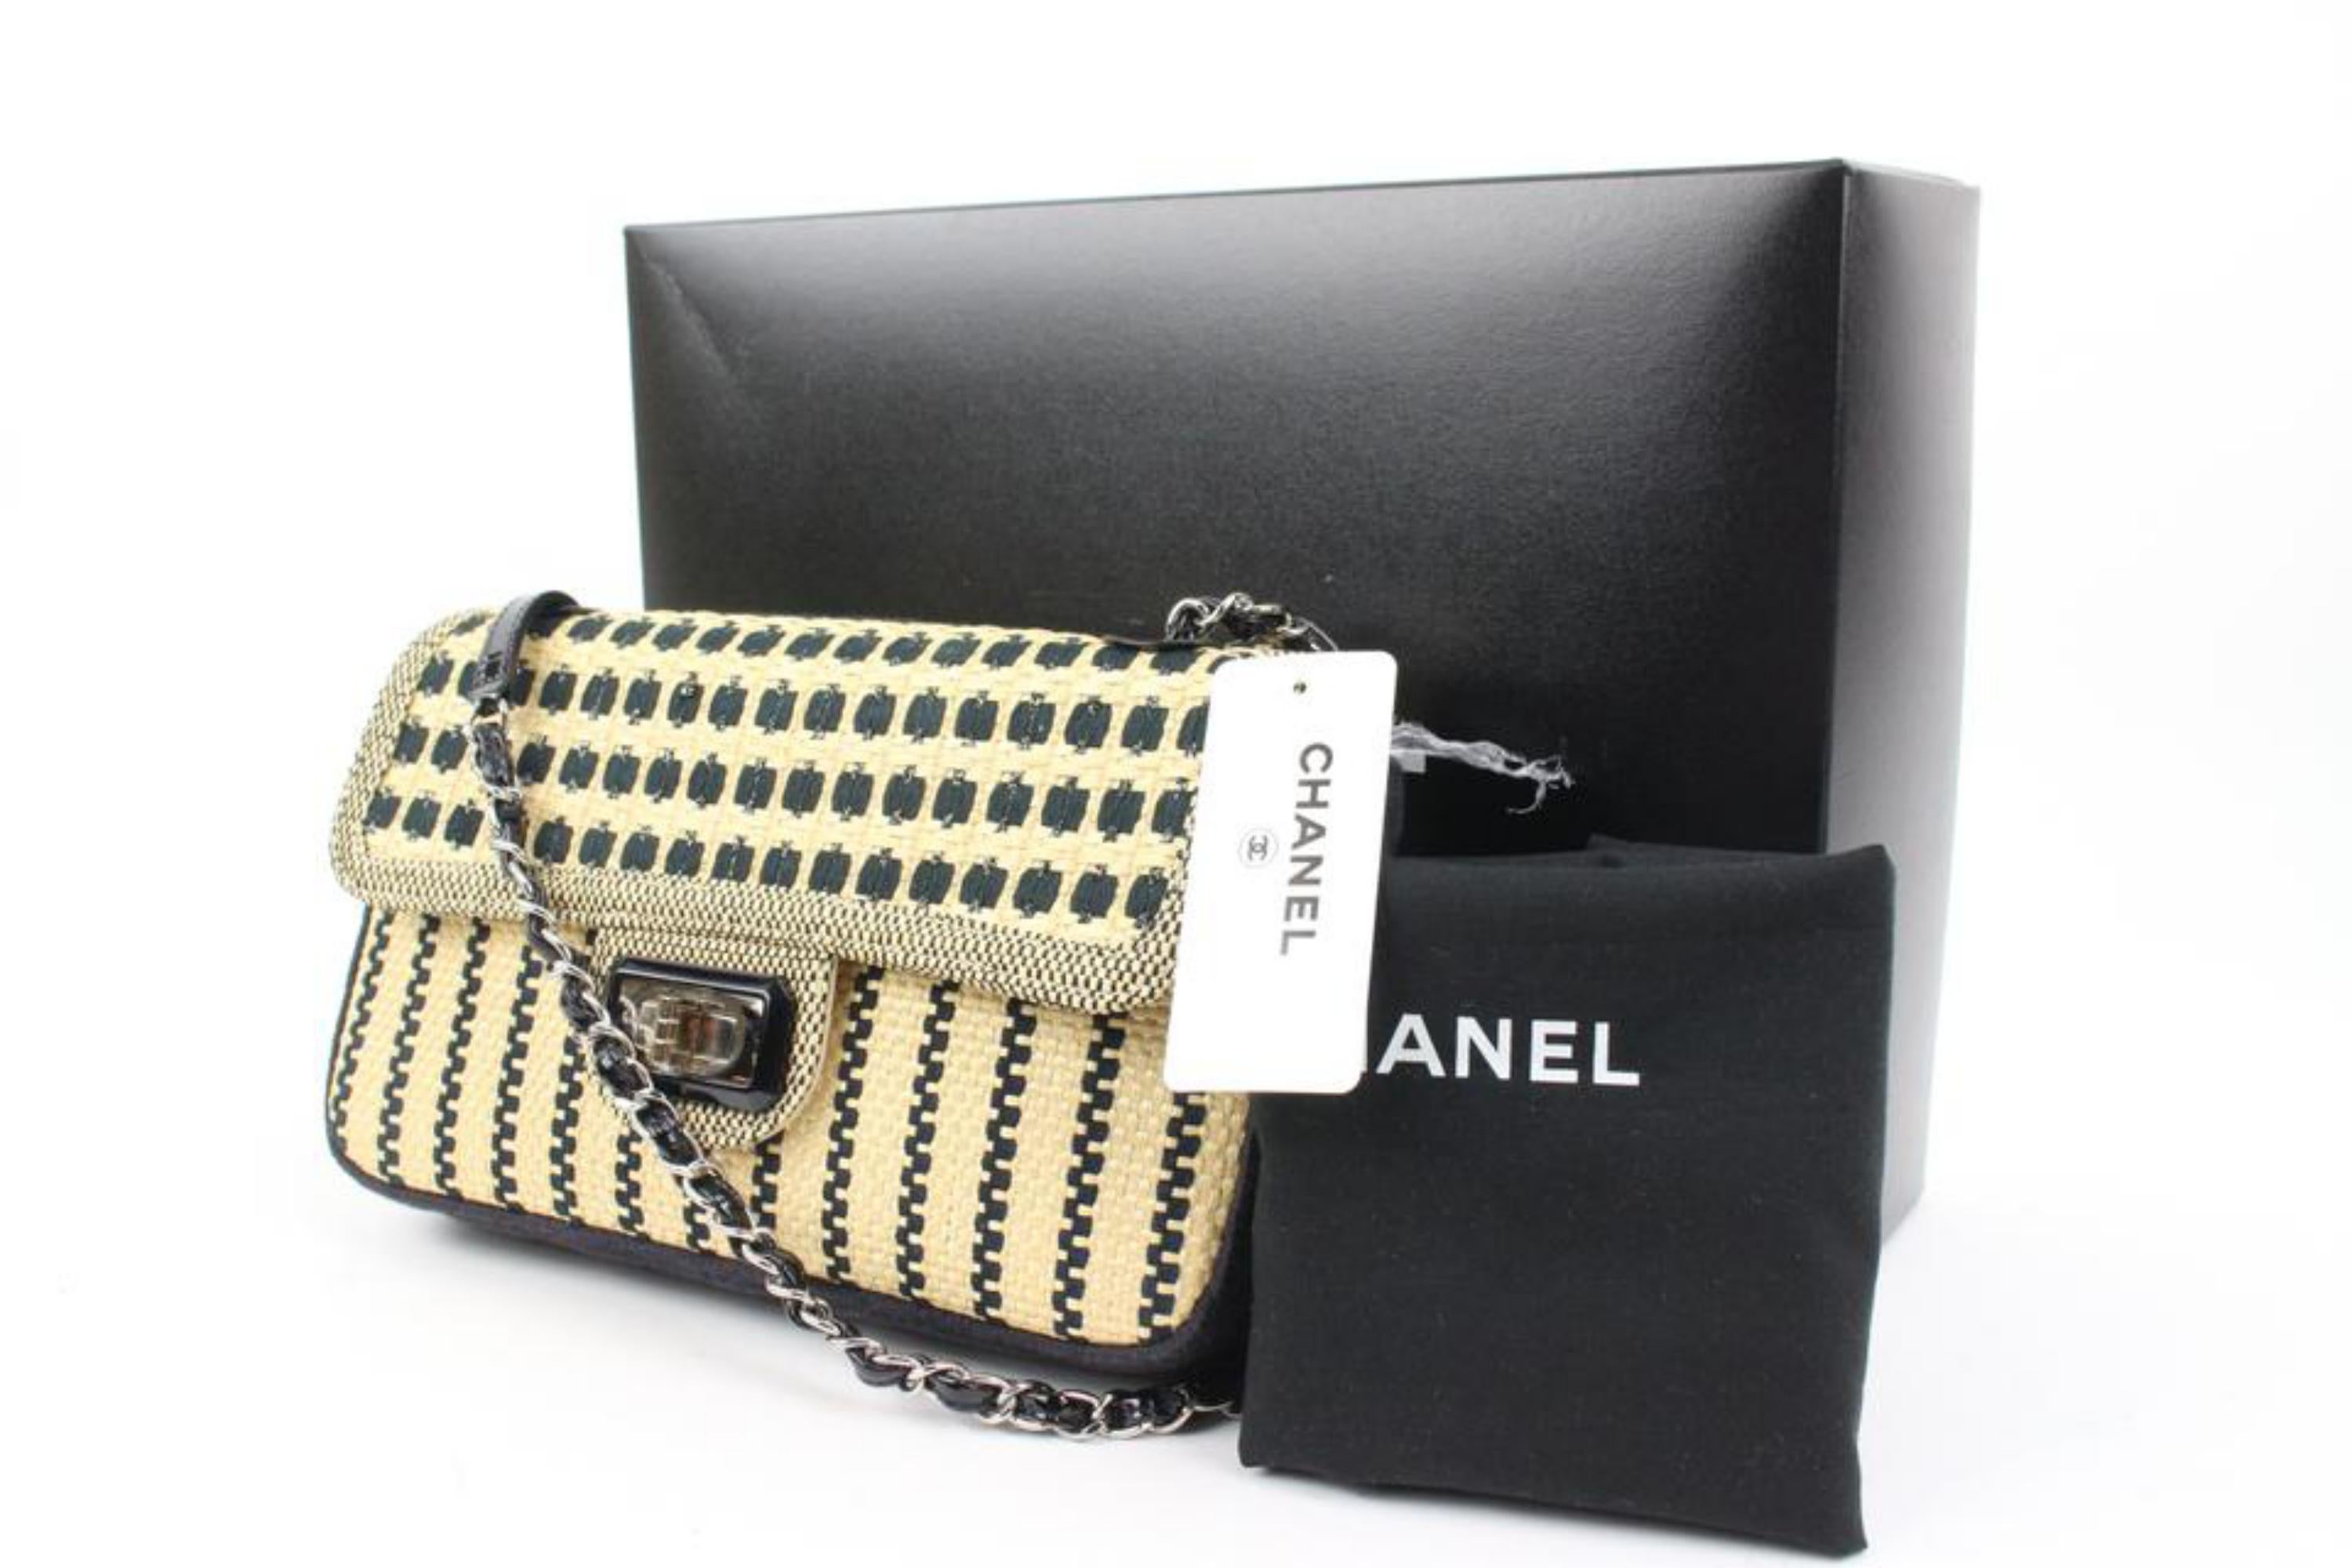 Chanel 12C Limited Rattan Wicker Straw Raffia Cannes Medium Flap SHW 32c128s
Date Code/Serial Number: 15850439
Made In: France
Measurements: Length:  10.2